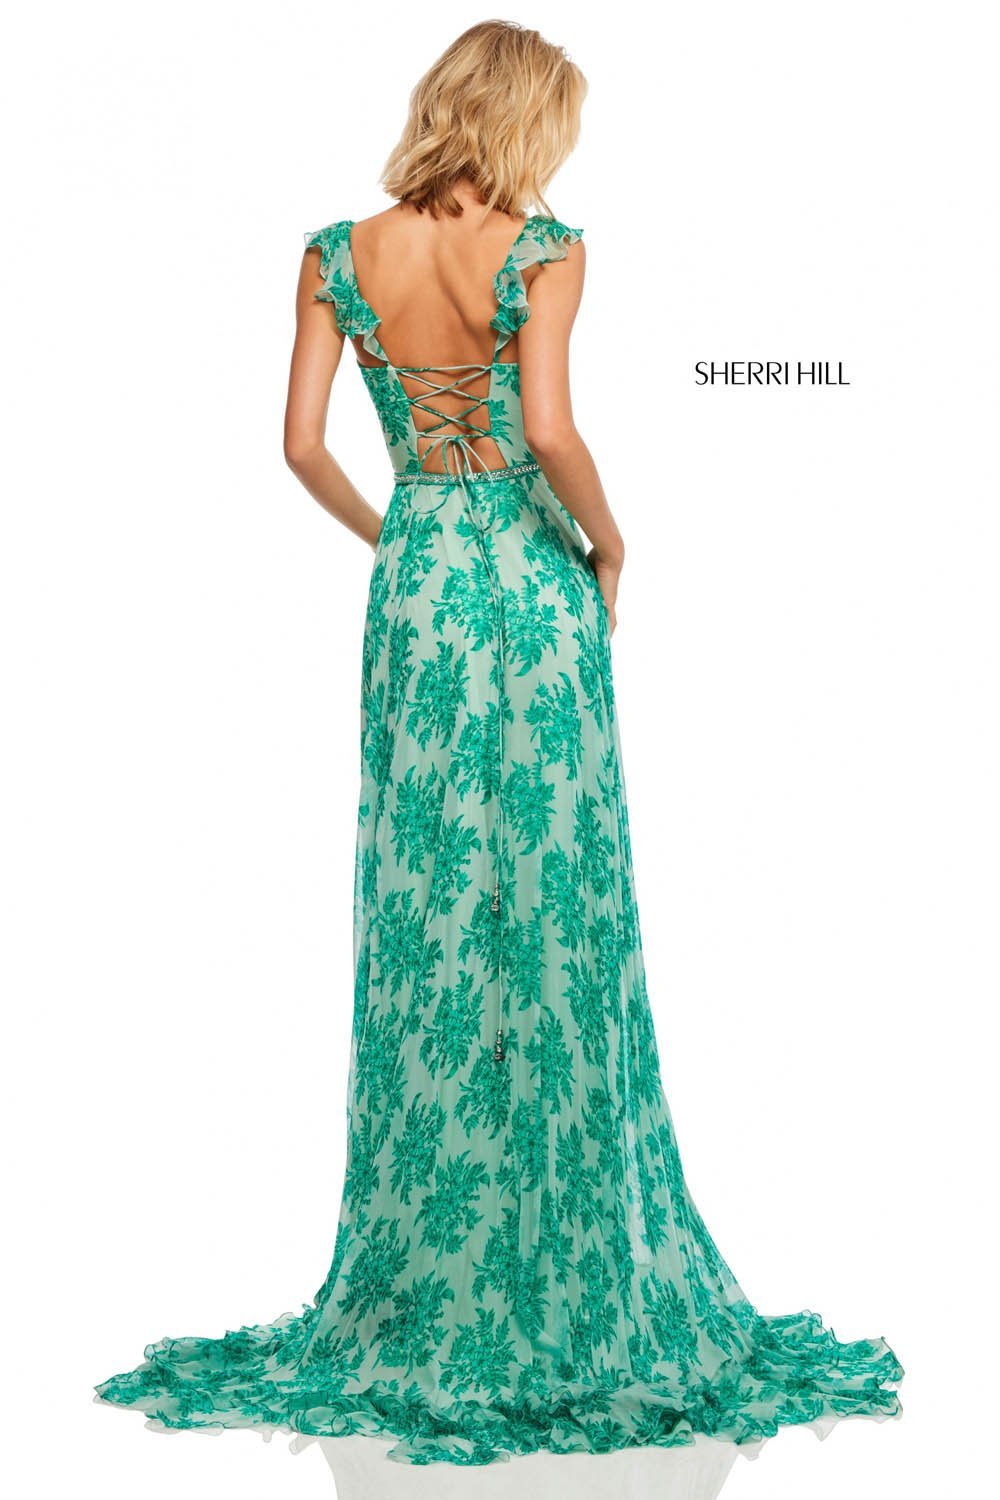 Sherri Hill 52713 dress images in these colors: Green Print.